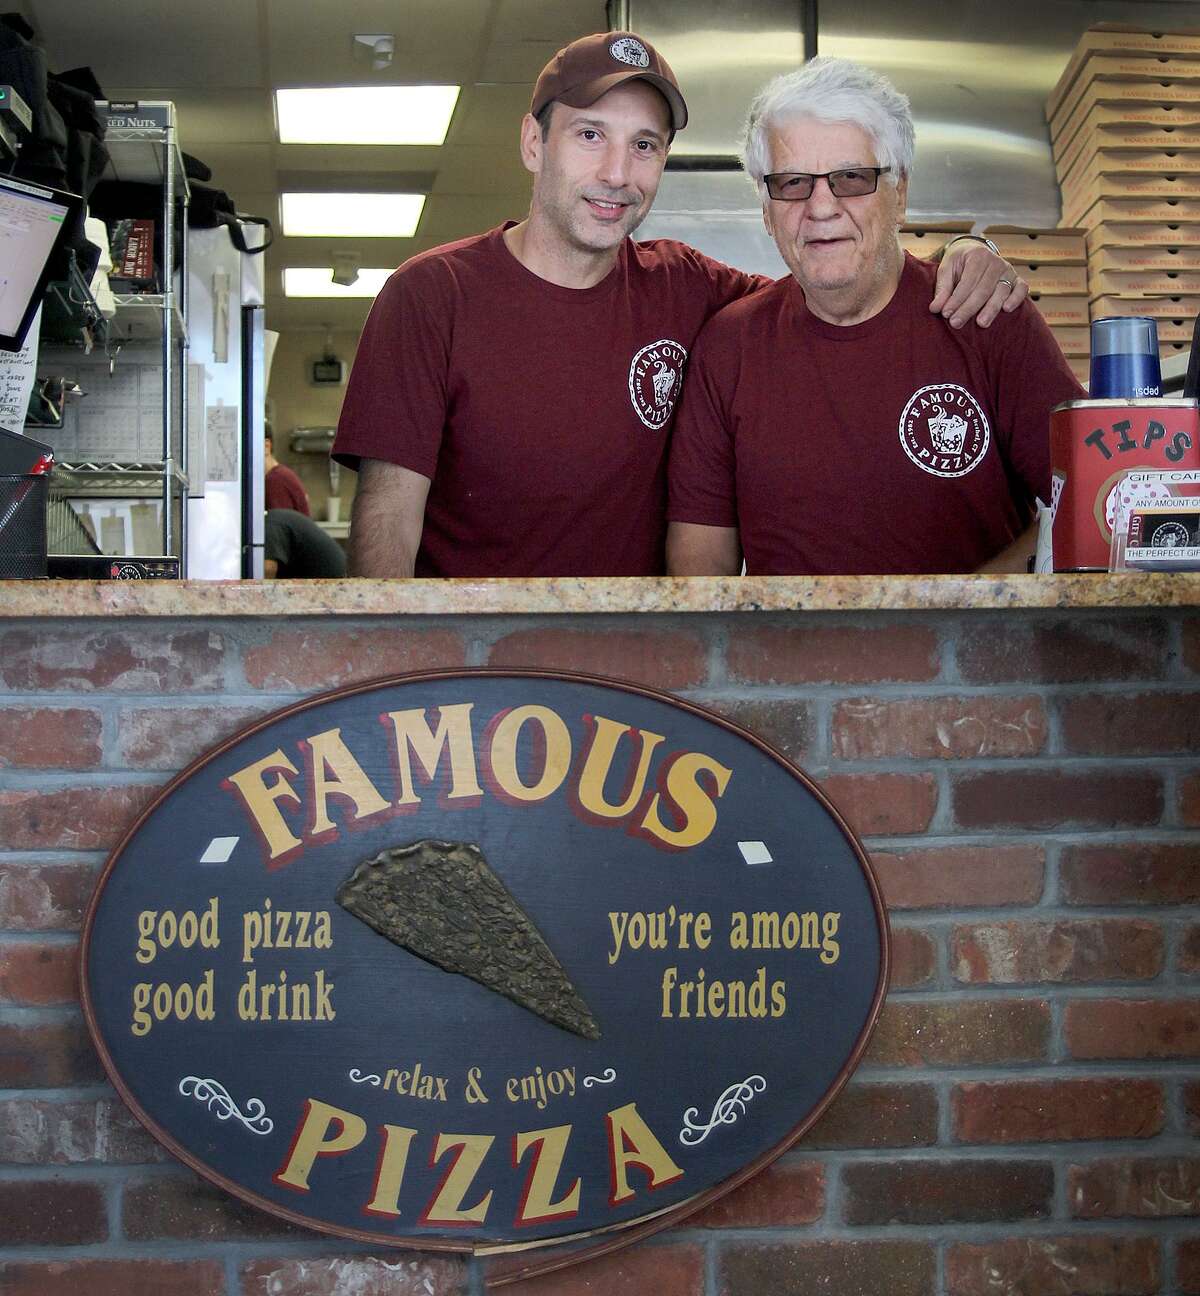 Perry and George Anastasakis sit at a table on Wednesday, Aug. 30, 2017, in their restaurant Famous Pizza, which has been opein for 35 yeras in Bethel, Conn.